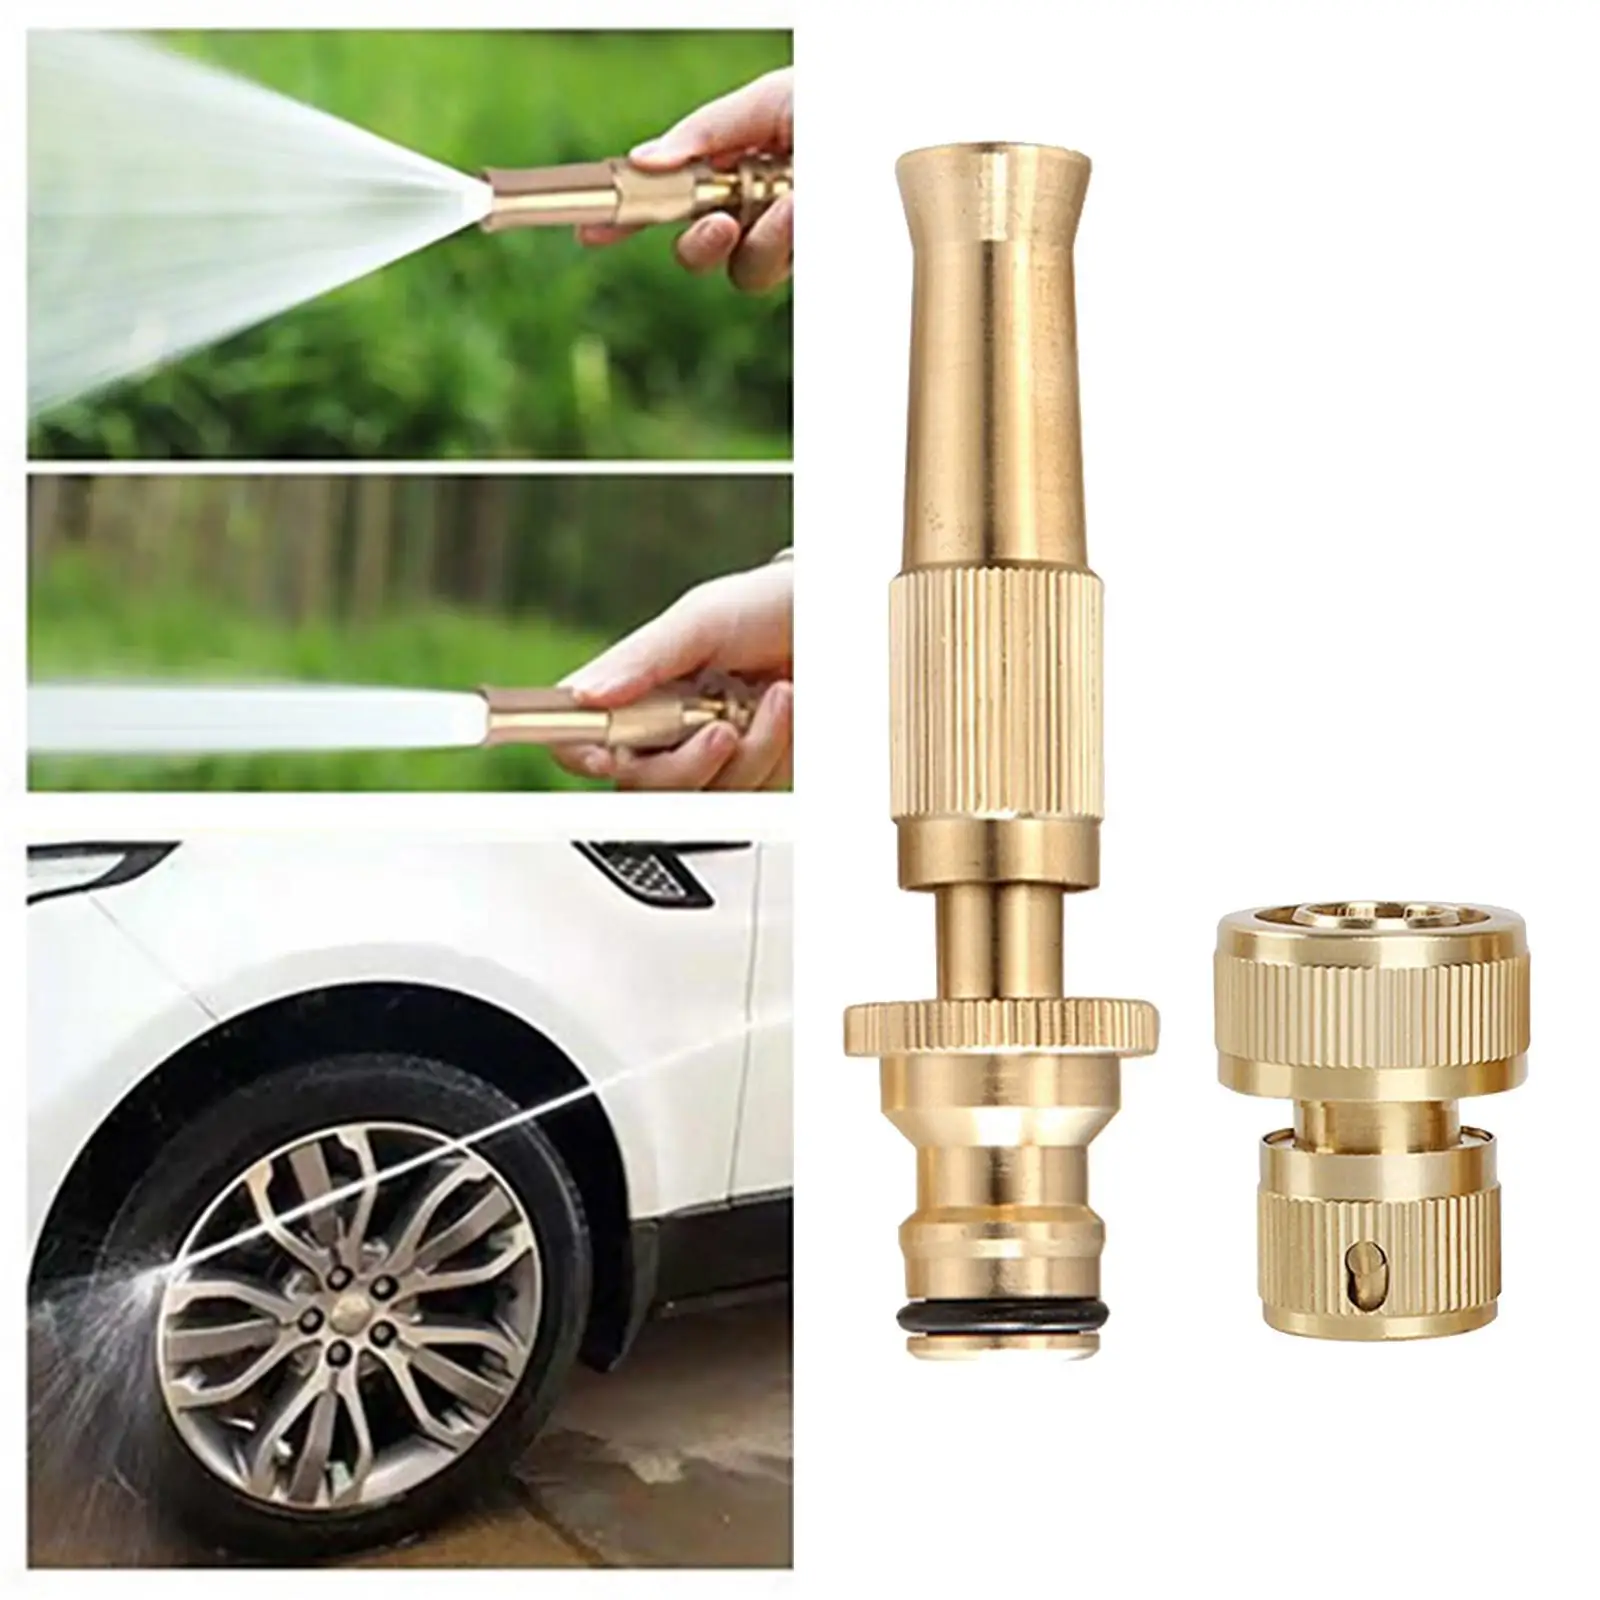 Portable High Pressure  Washer  Water  Watering Sprayer Nozzle Control for Car Irrigation